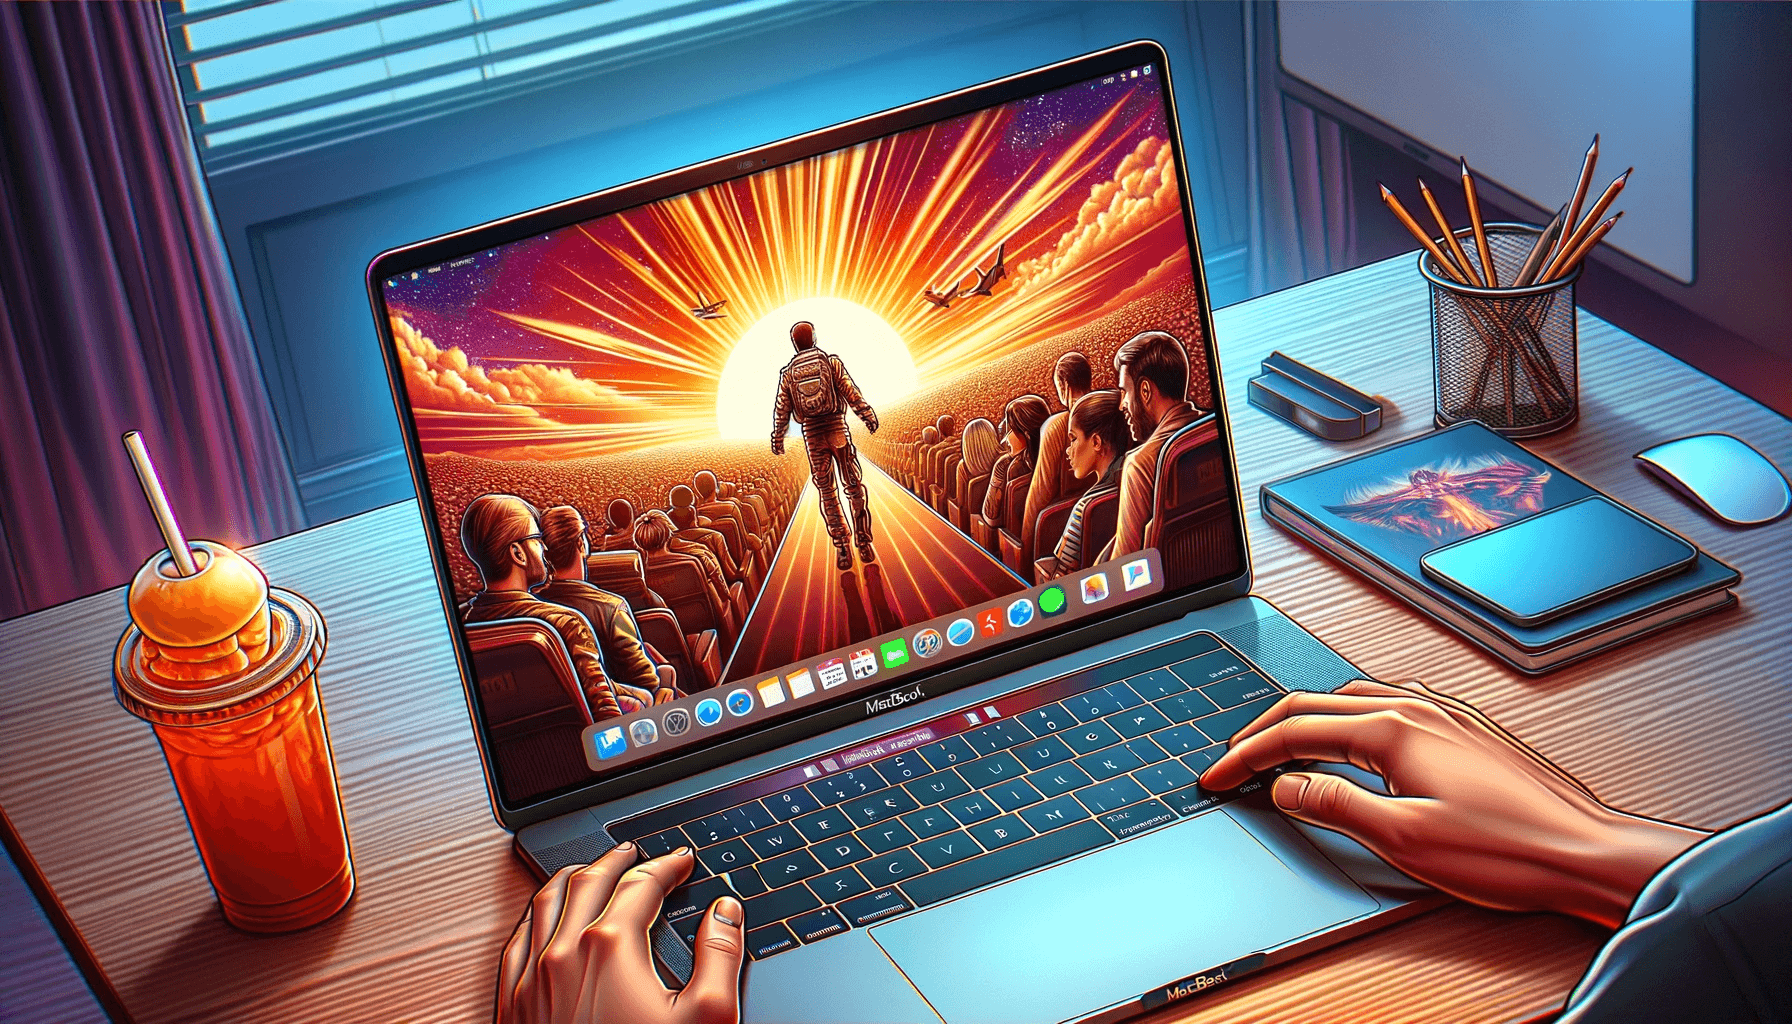 DALL·E 2023 11 24 17.52.46 A digital illustration of a movie being watched on a MacBook. The MacBook is open on a desk with its screen showing a scene from a movie. The movie s